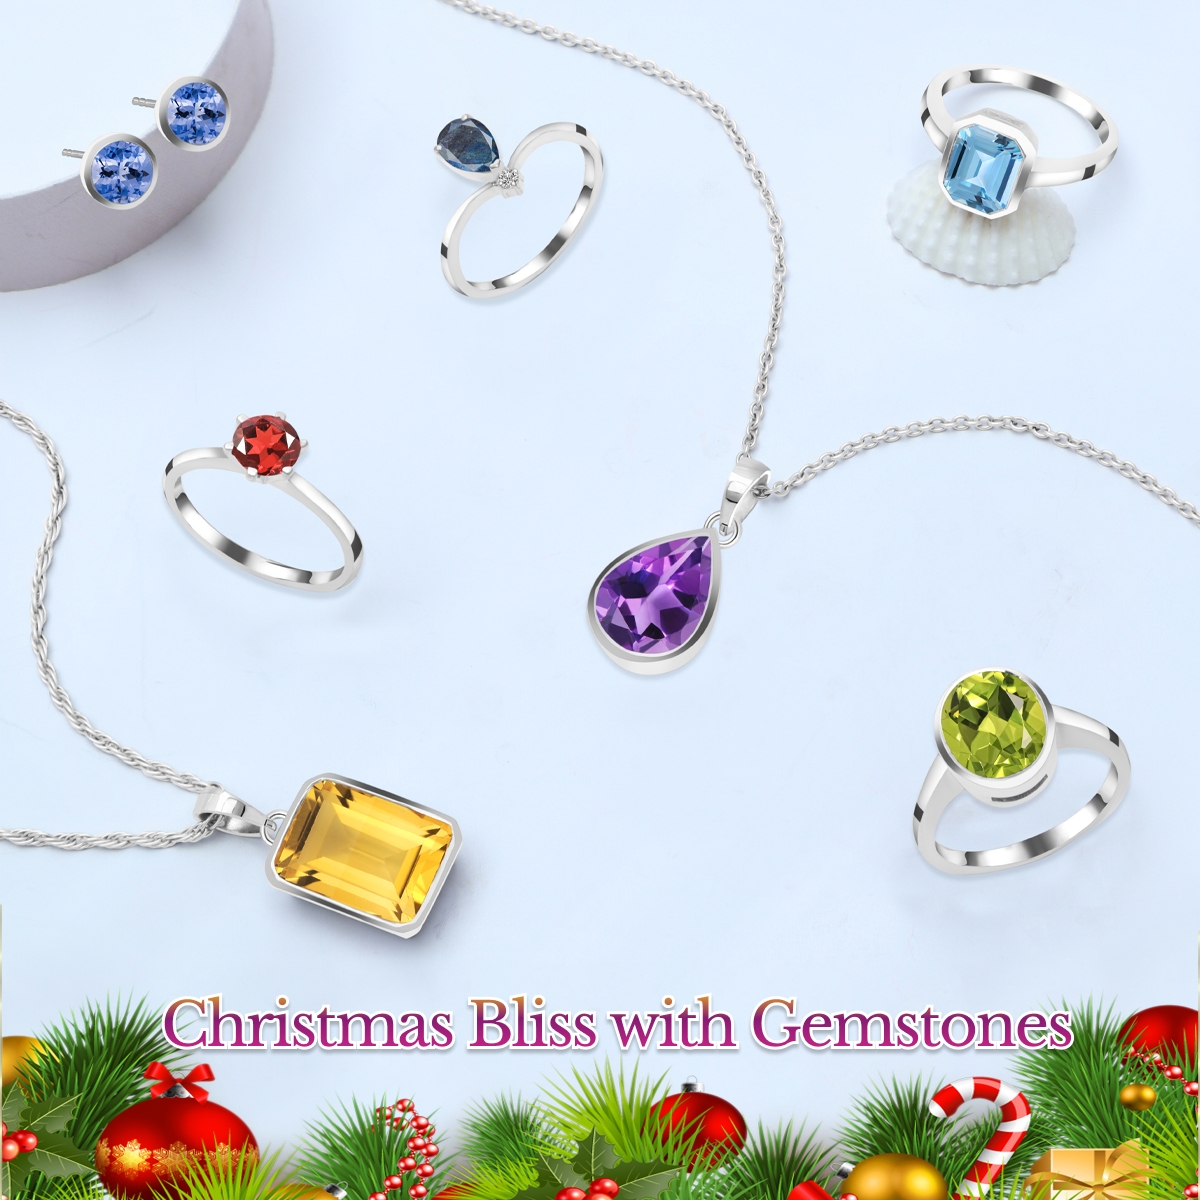 Best Gemstone for this Christmas